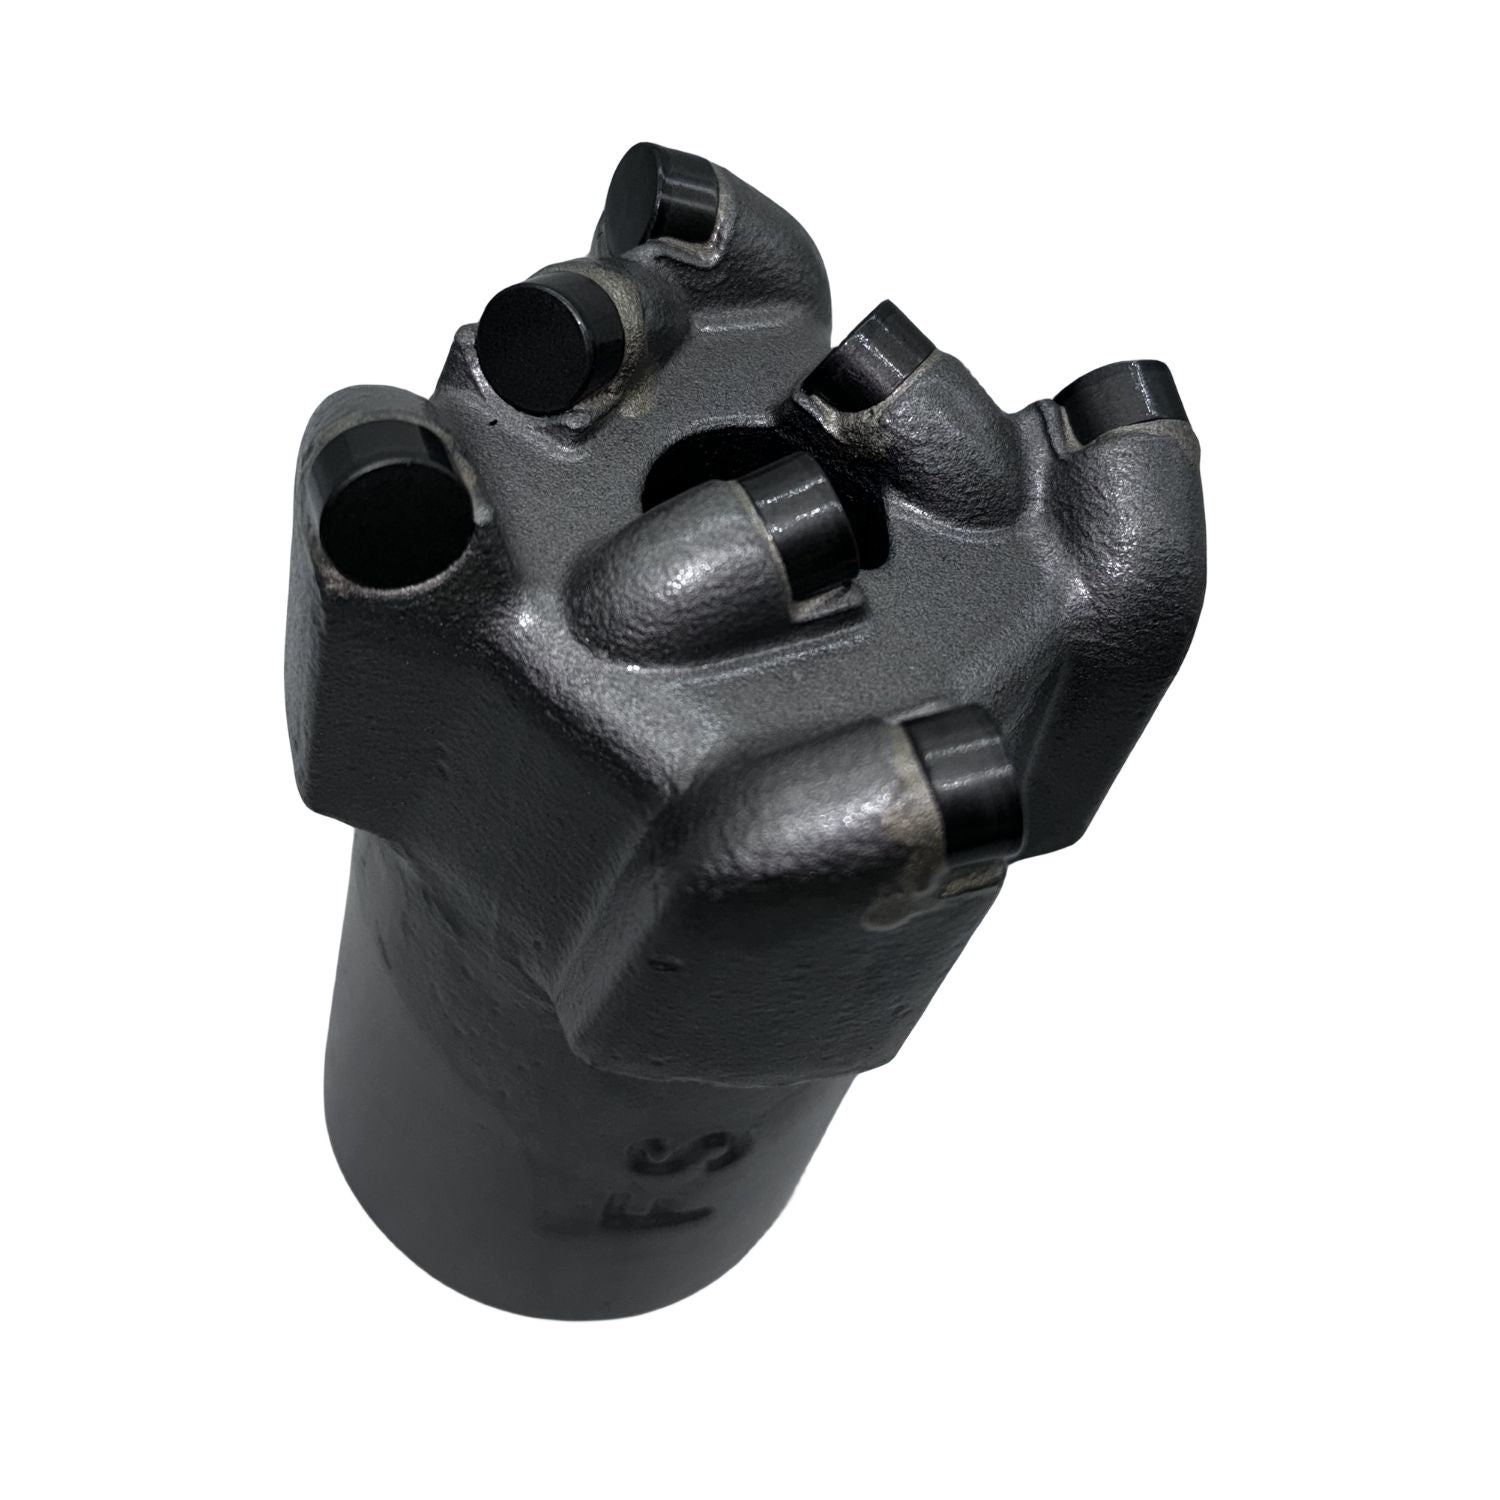 PDC-Flat-Top-Coreless-Drill-Bit-for-Deep-Water-Well-Grouting-Holes-and-Geothermal-Hard-Rock